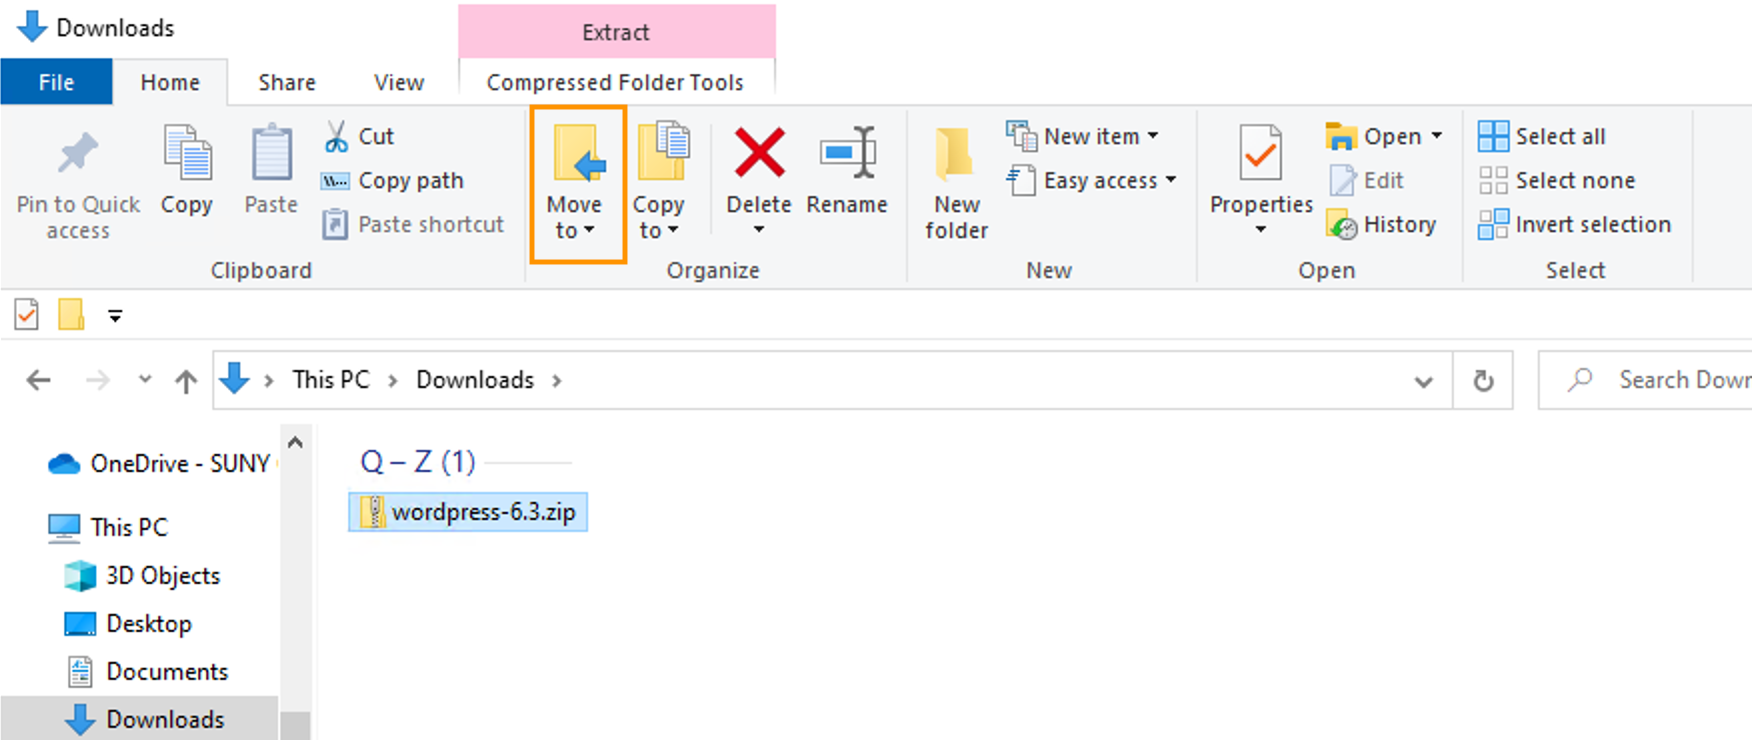 "Move to" button in File Explorer and wordpress folder to be moved